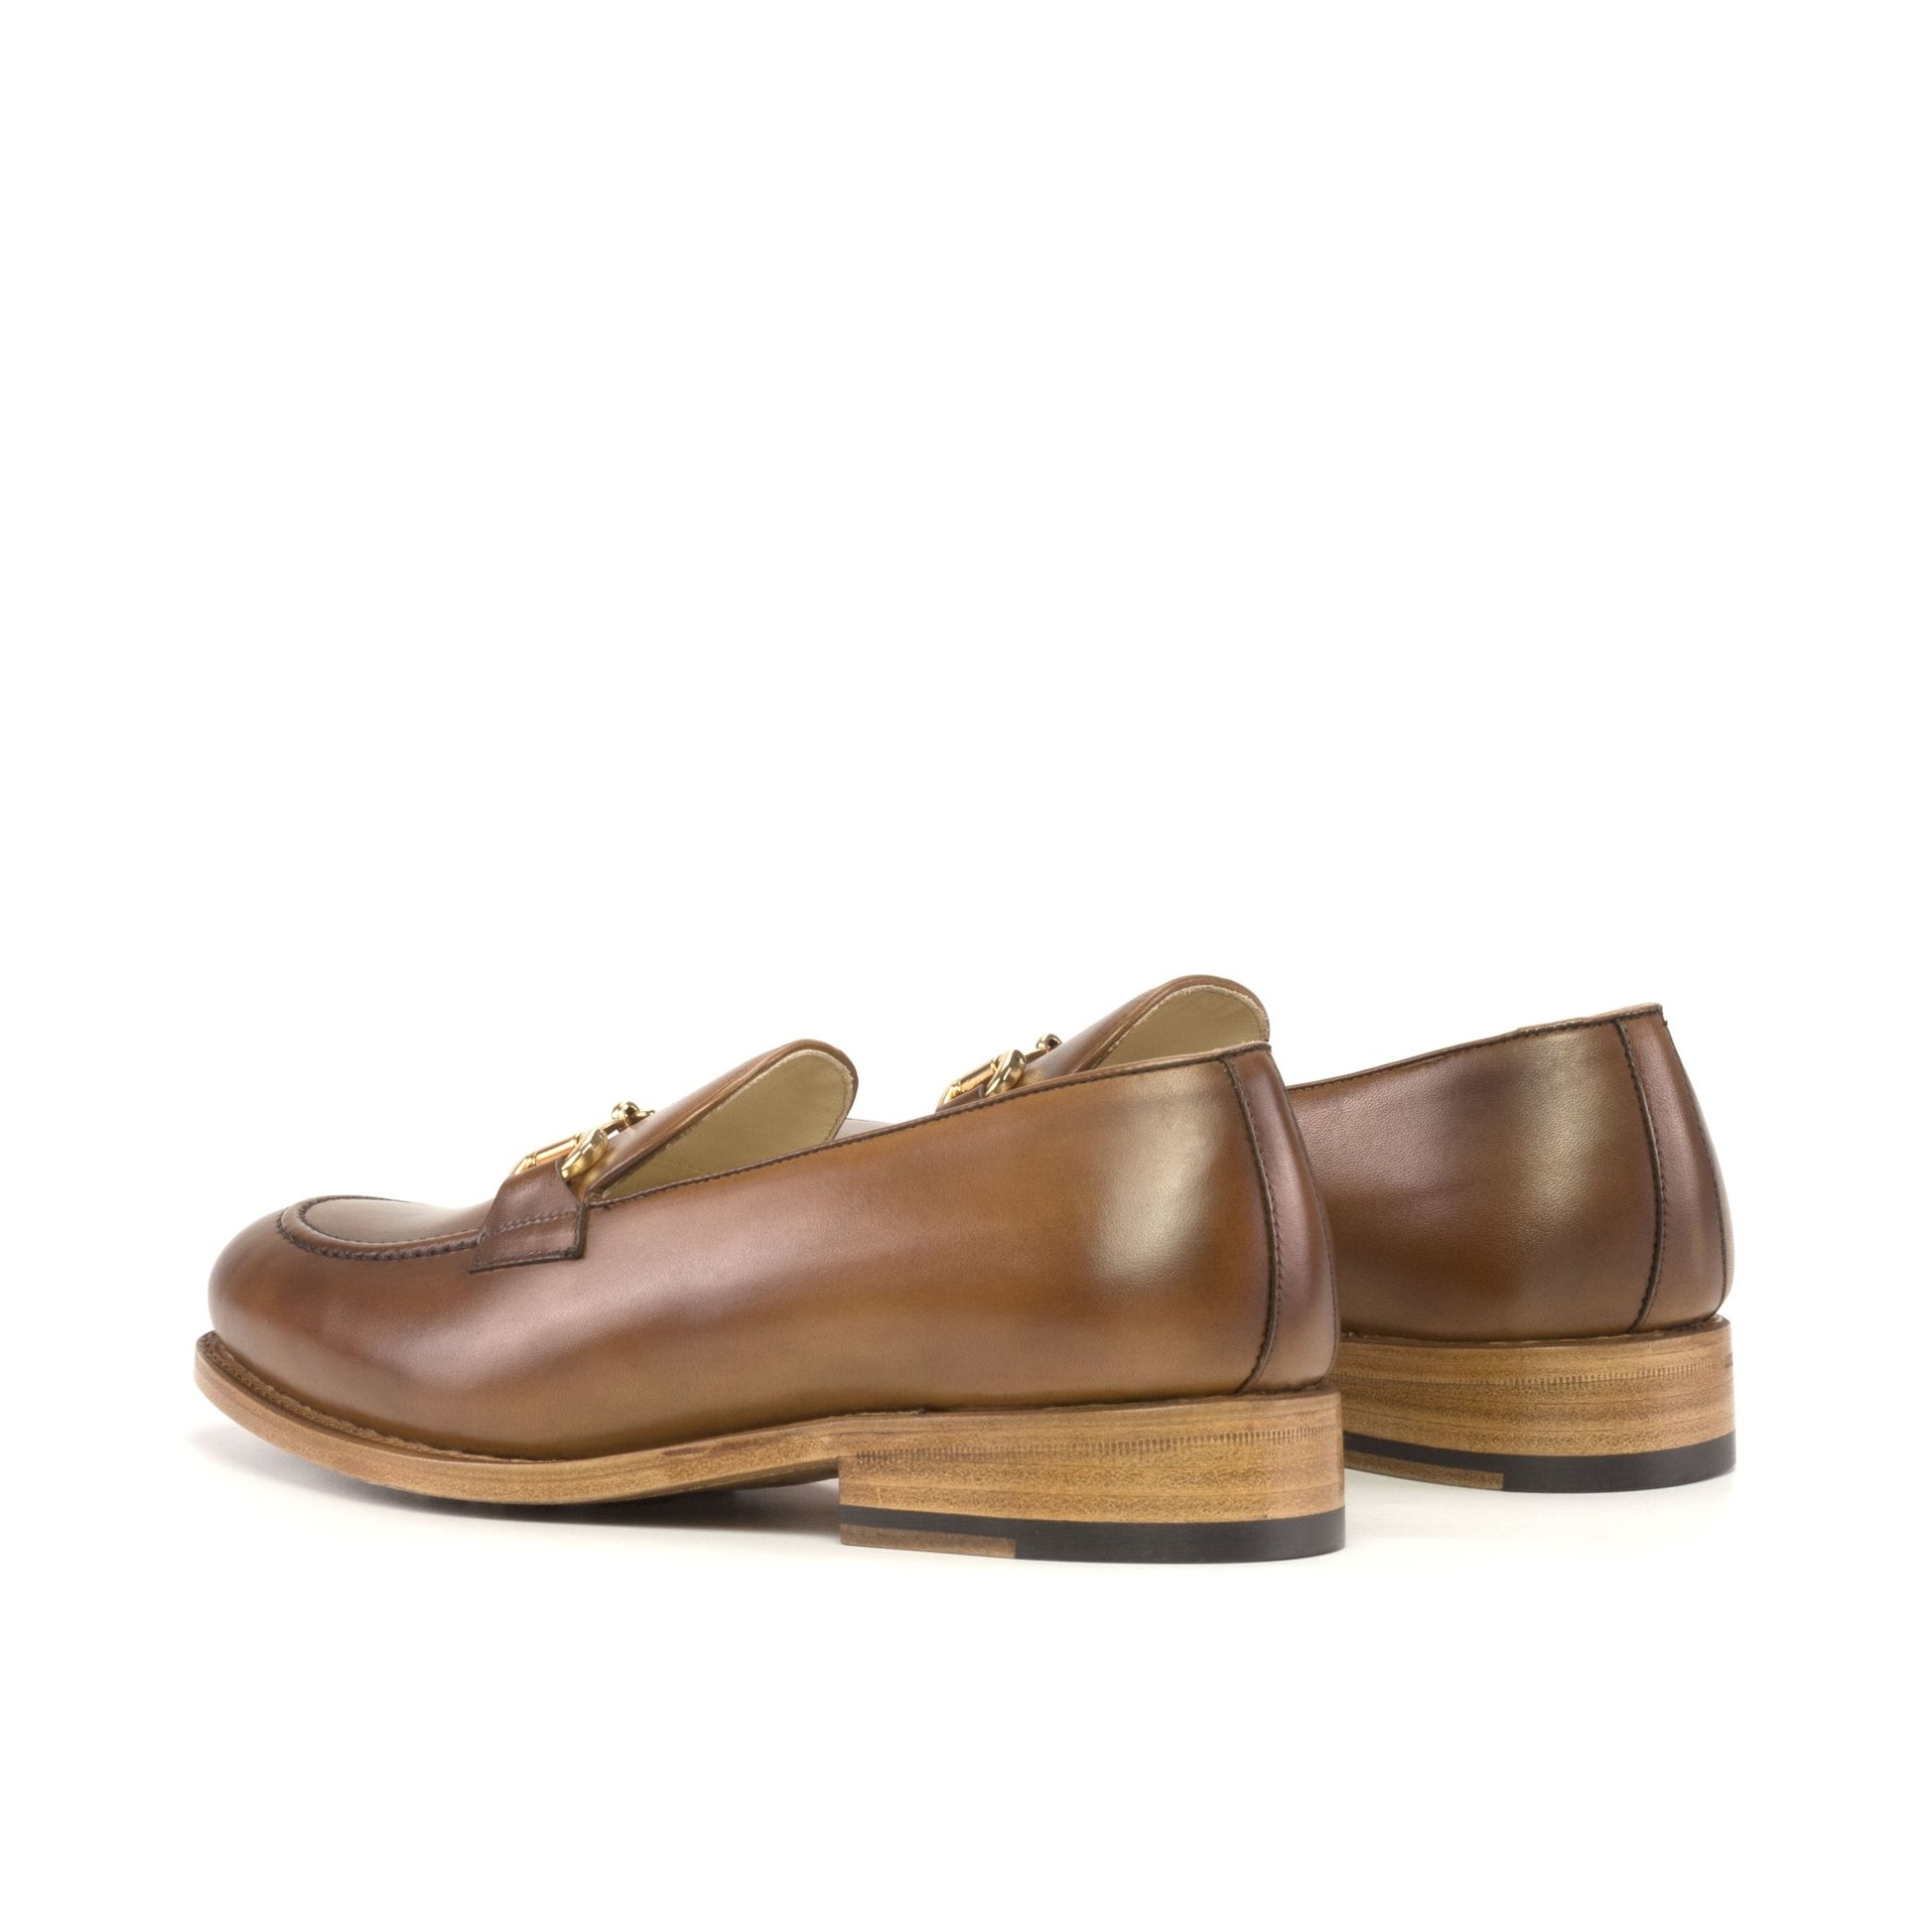 Bit Loafer in Medium Brown Calf - Zatorres | Free Shipping on orders over $200